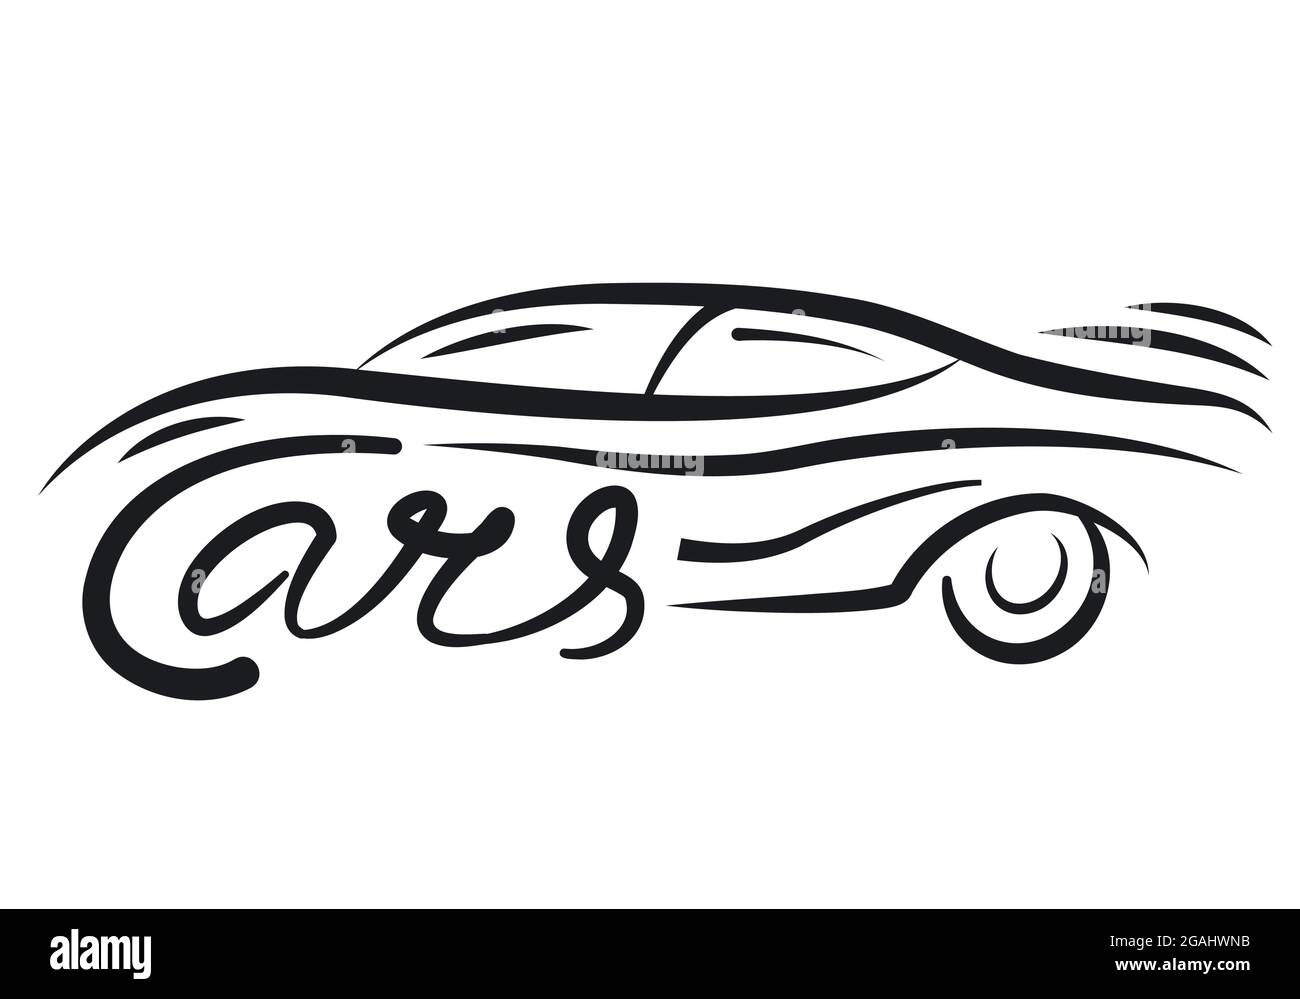 Illustration of the car logo with lettering Stock Vector